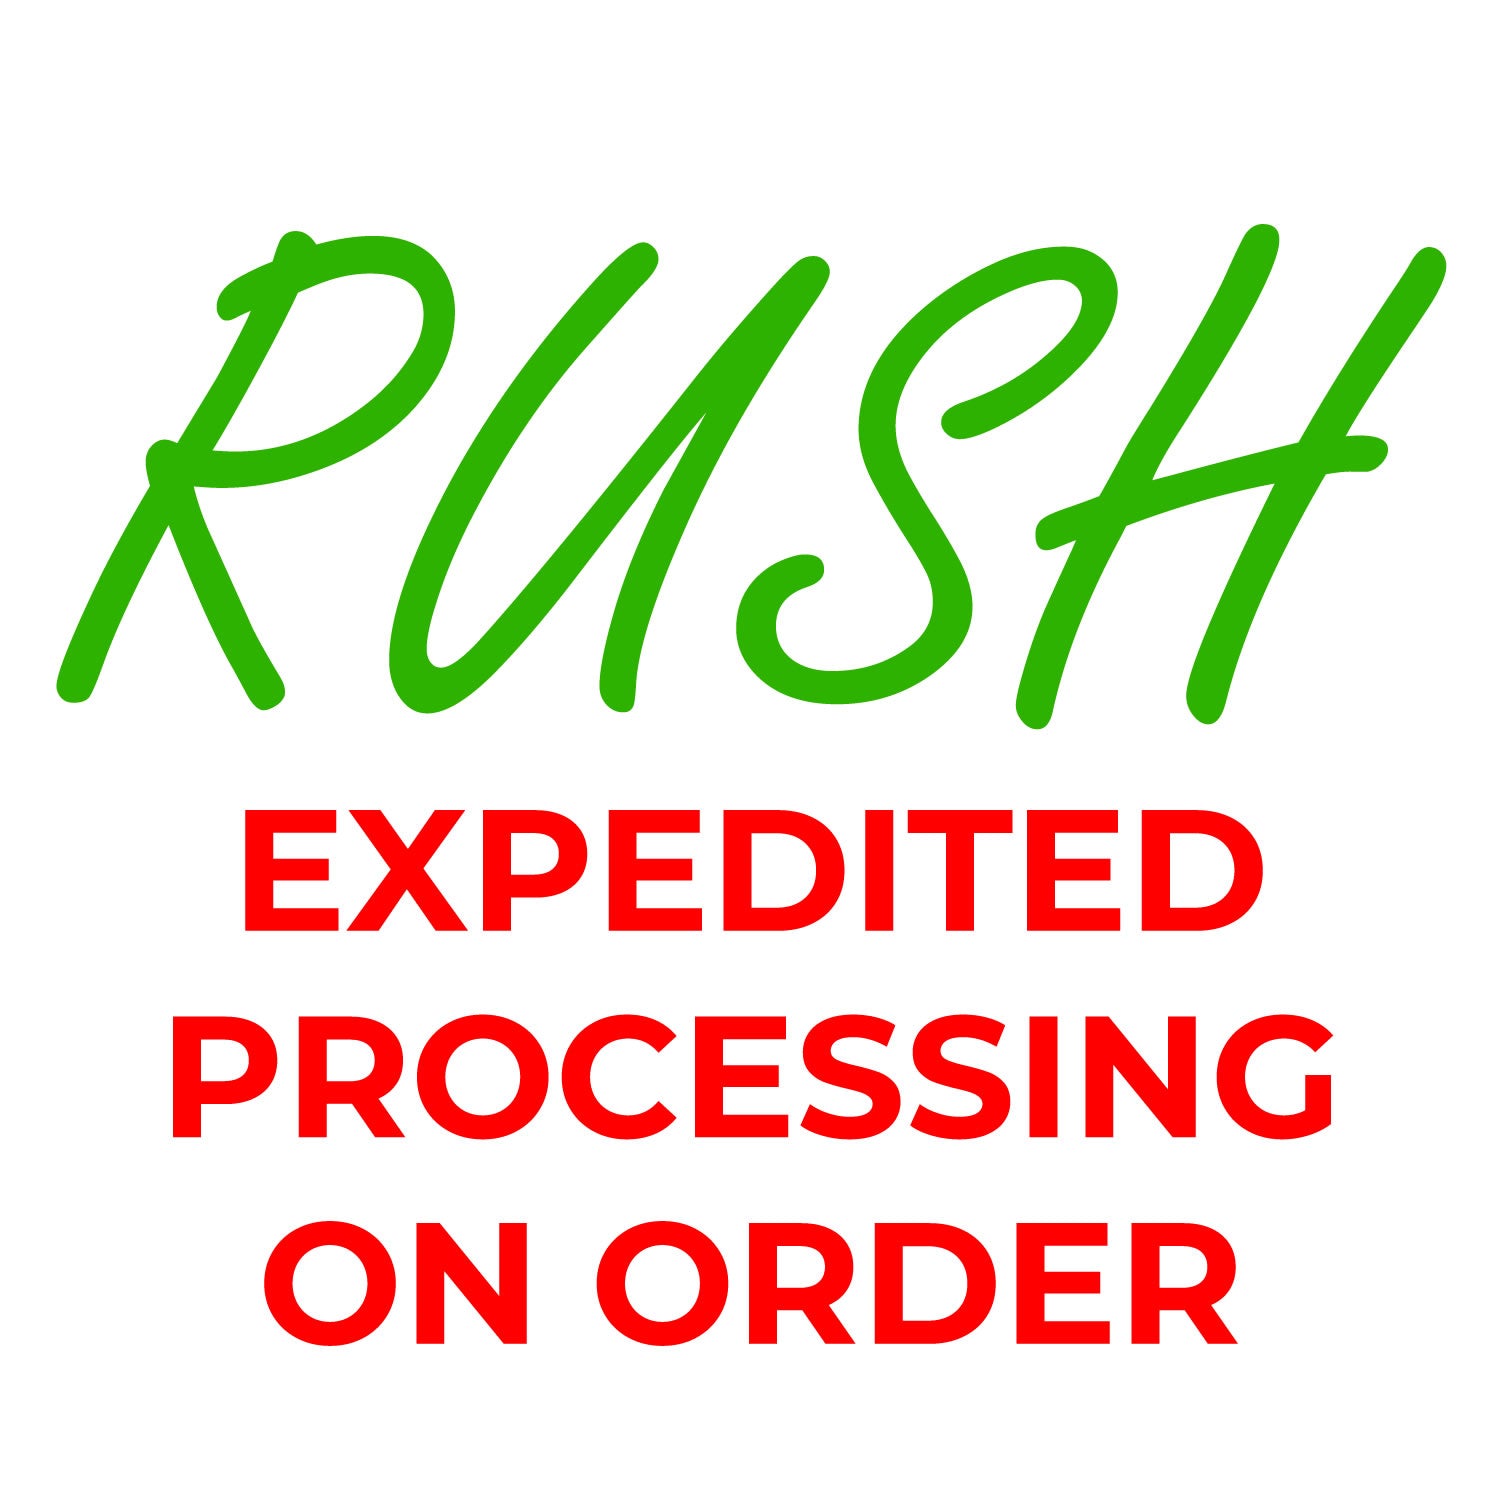 Expedited Processing